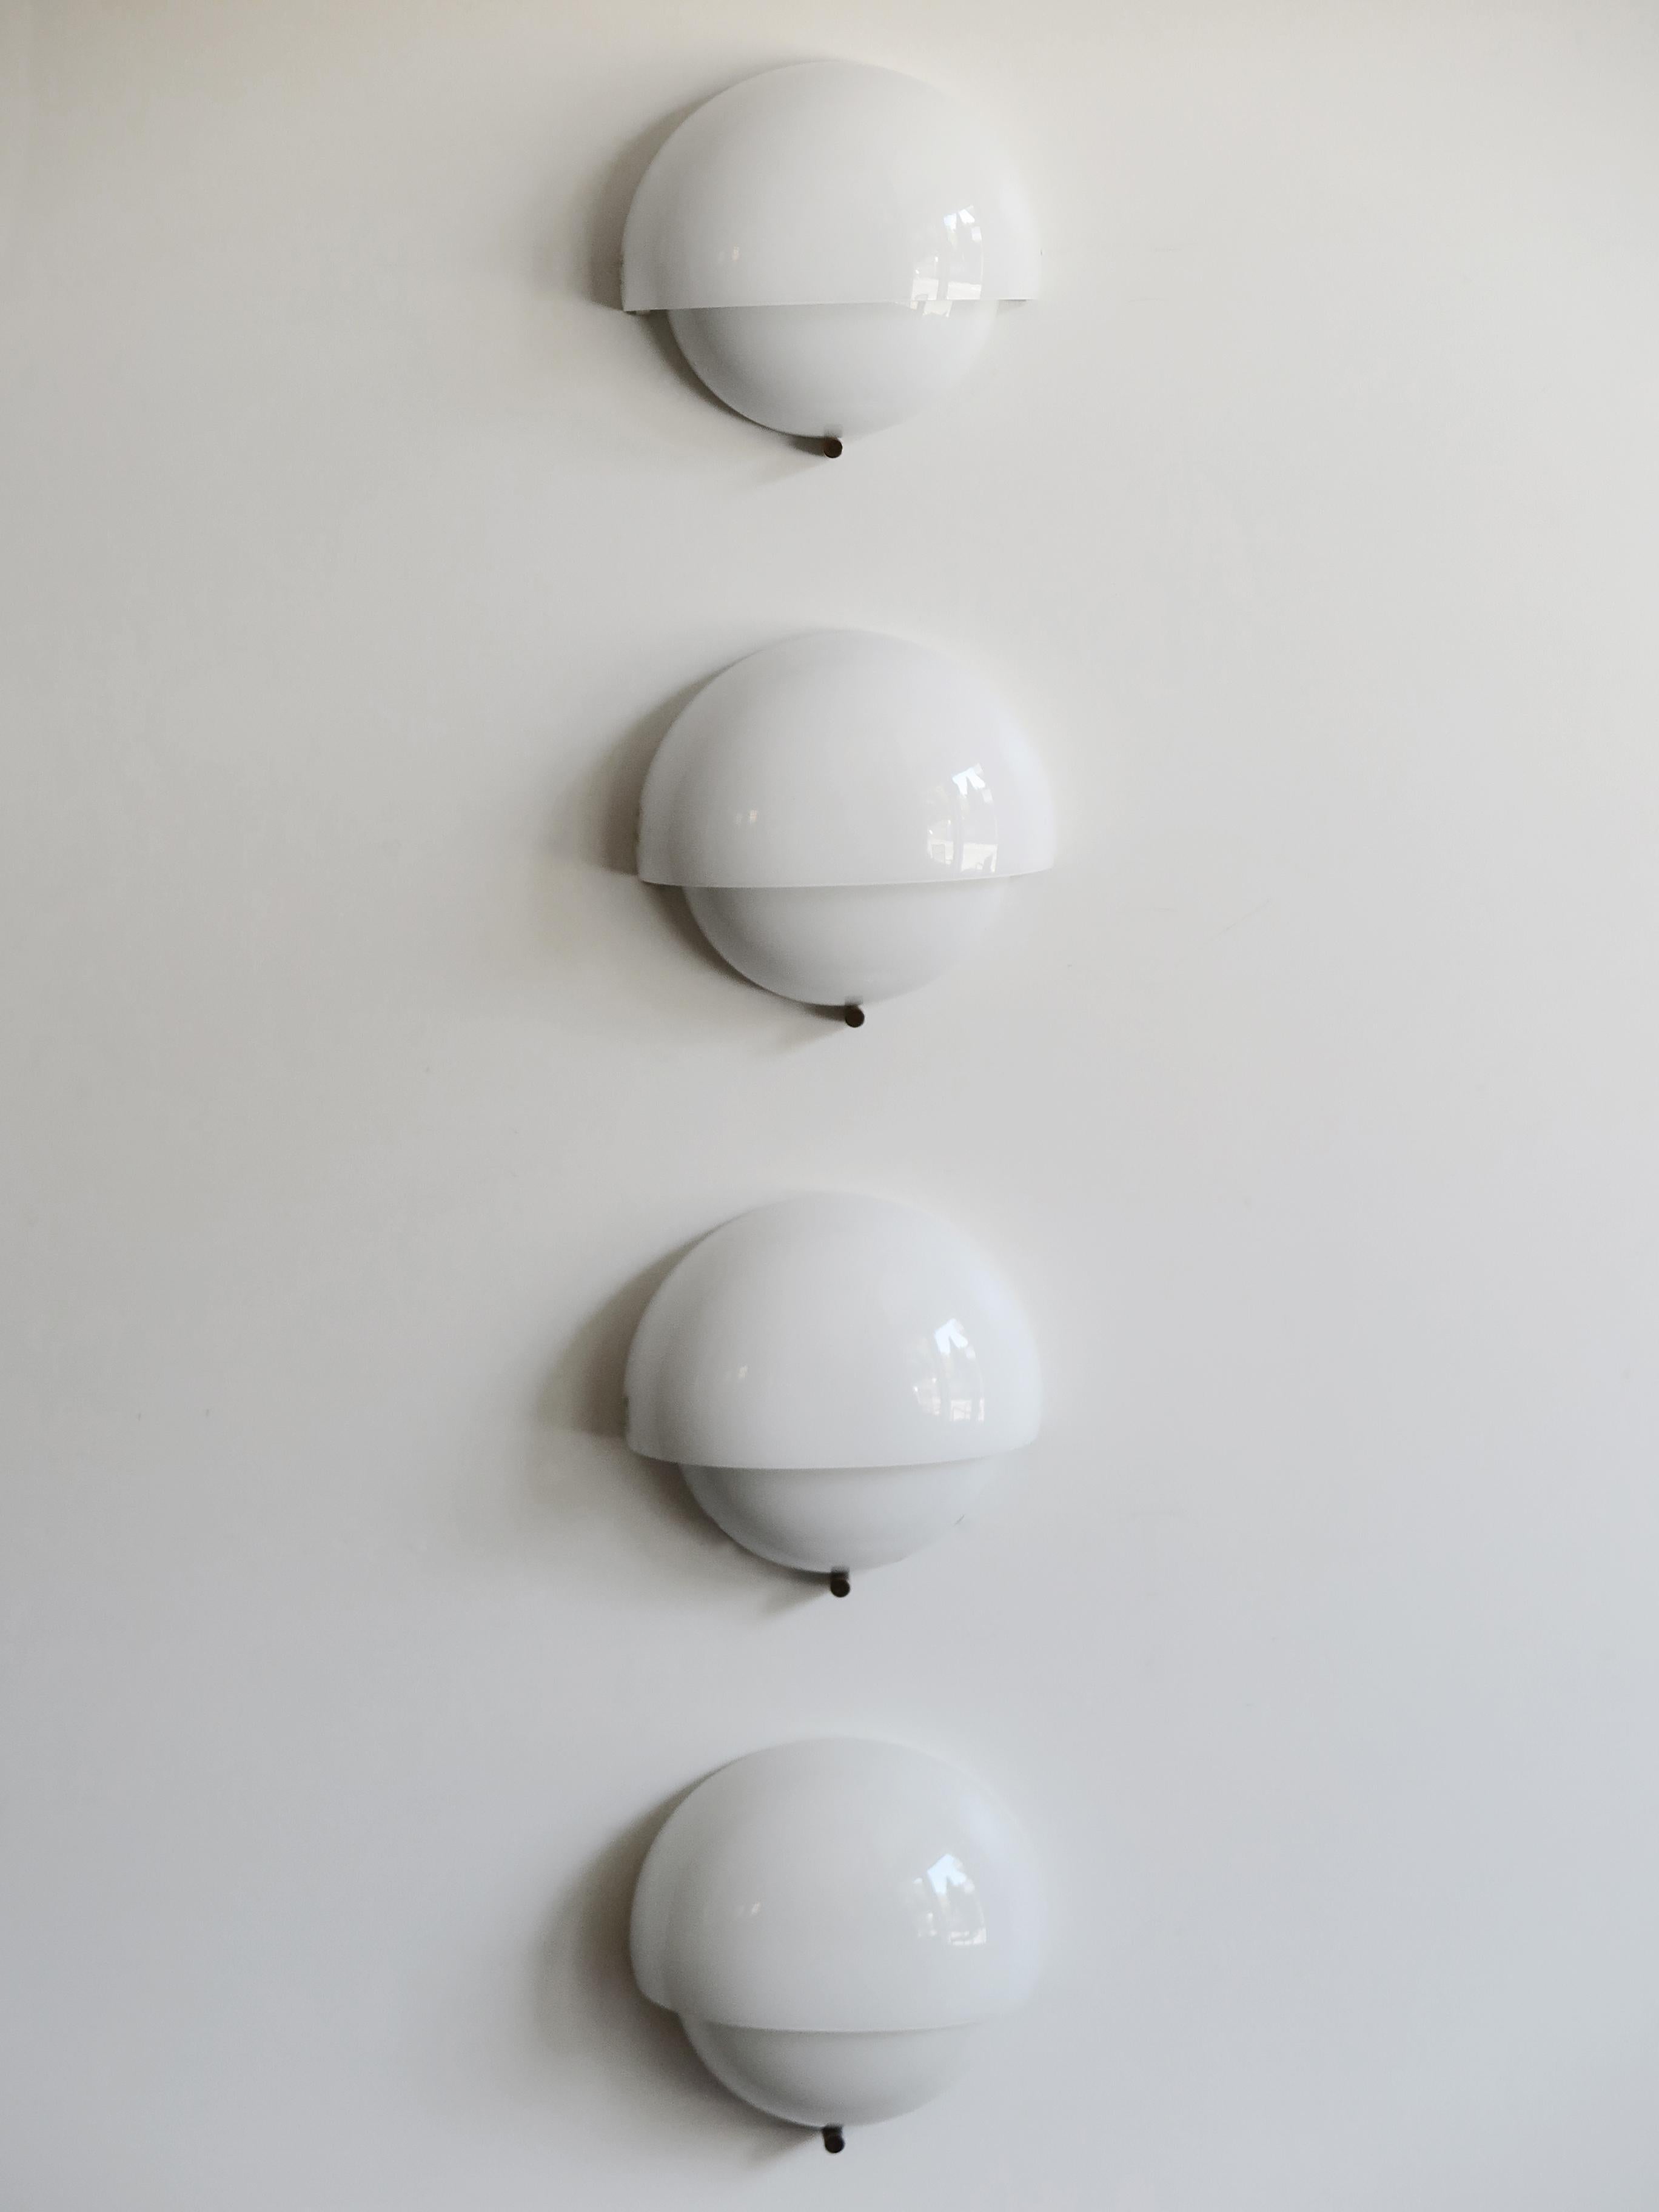 Set of four Italian sconces or wall lamps model Mania designed by italian designer Vico Magistretti for Artemide in 1963 model with white opaline Murano glass (see sticker) and brass detail, 1960s
XIII Triennale.
Bibliography:
Repertorio del